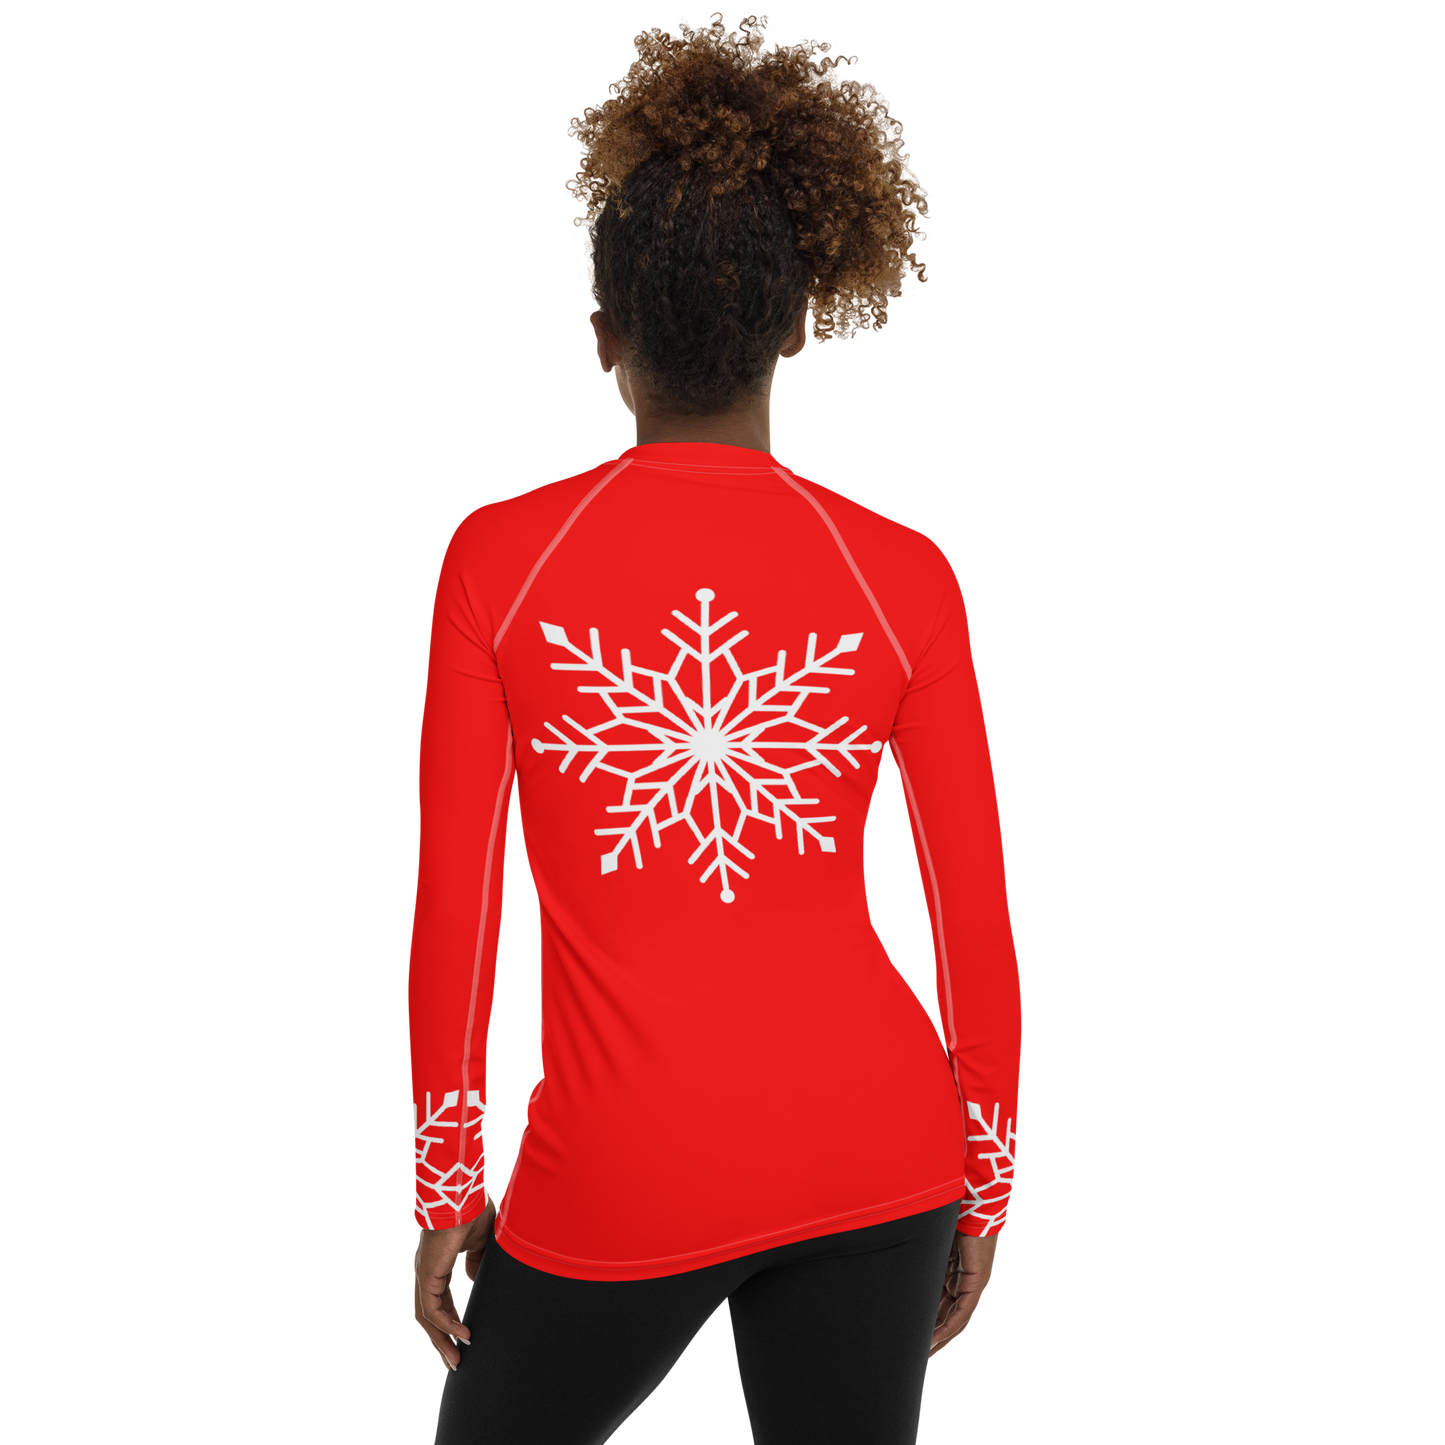 Winter Snowflake Top, White Snowflake on Bright Red Women's Rash Guard, Holiday Top